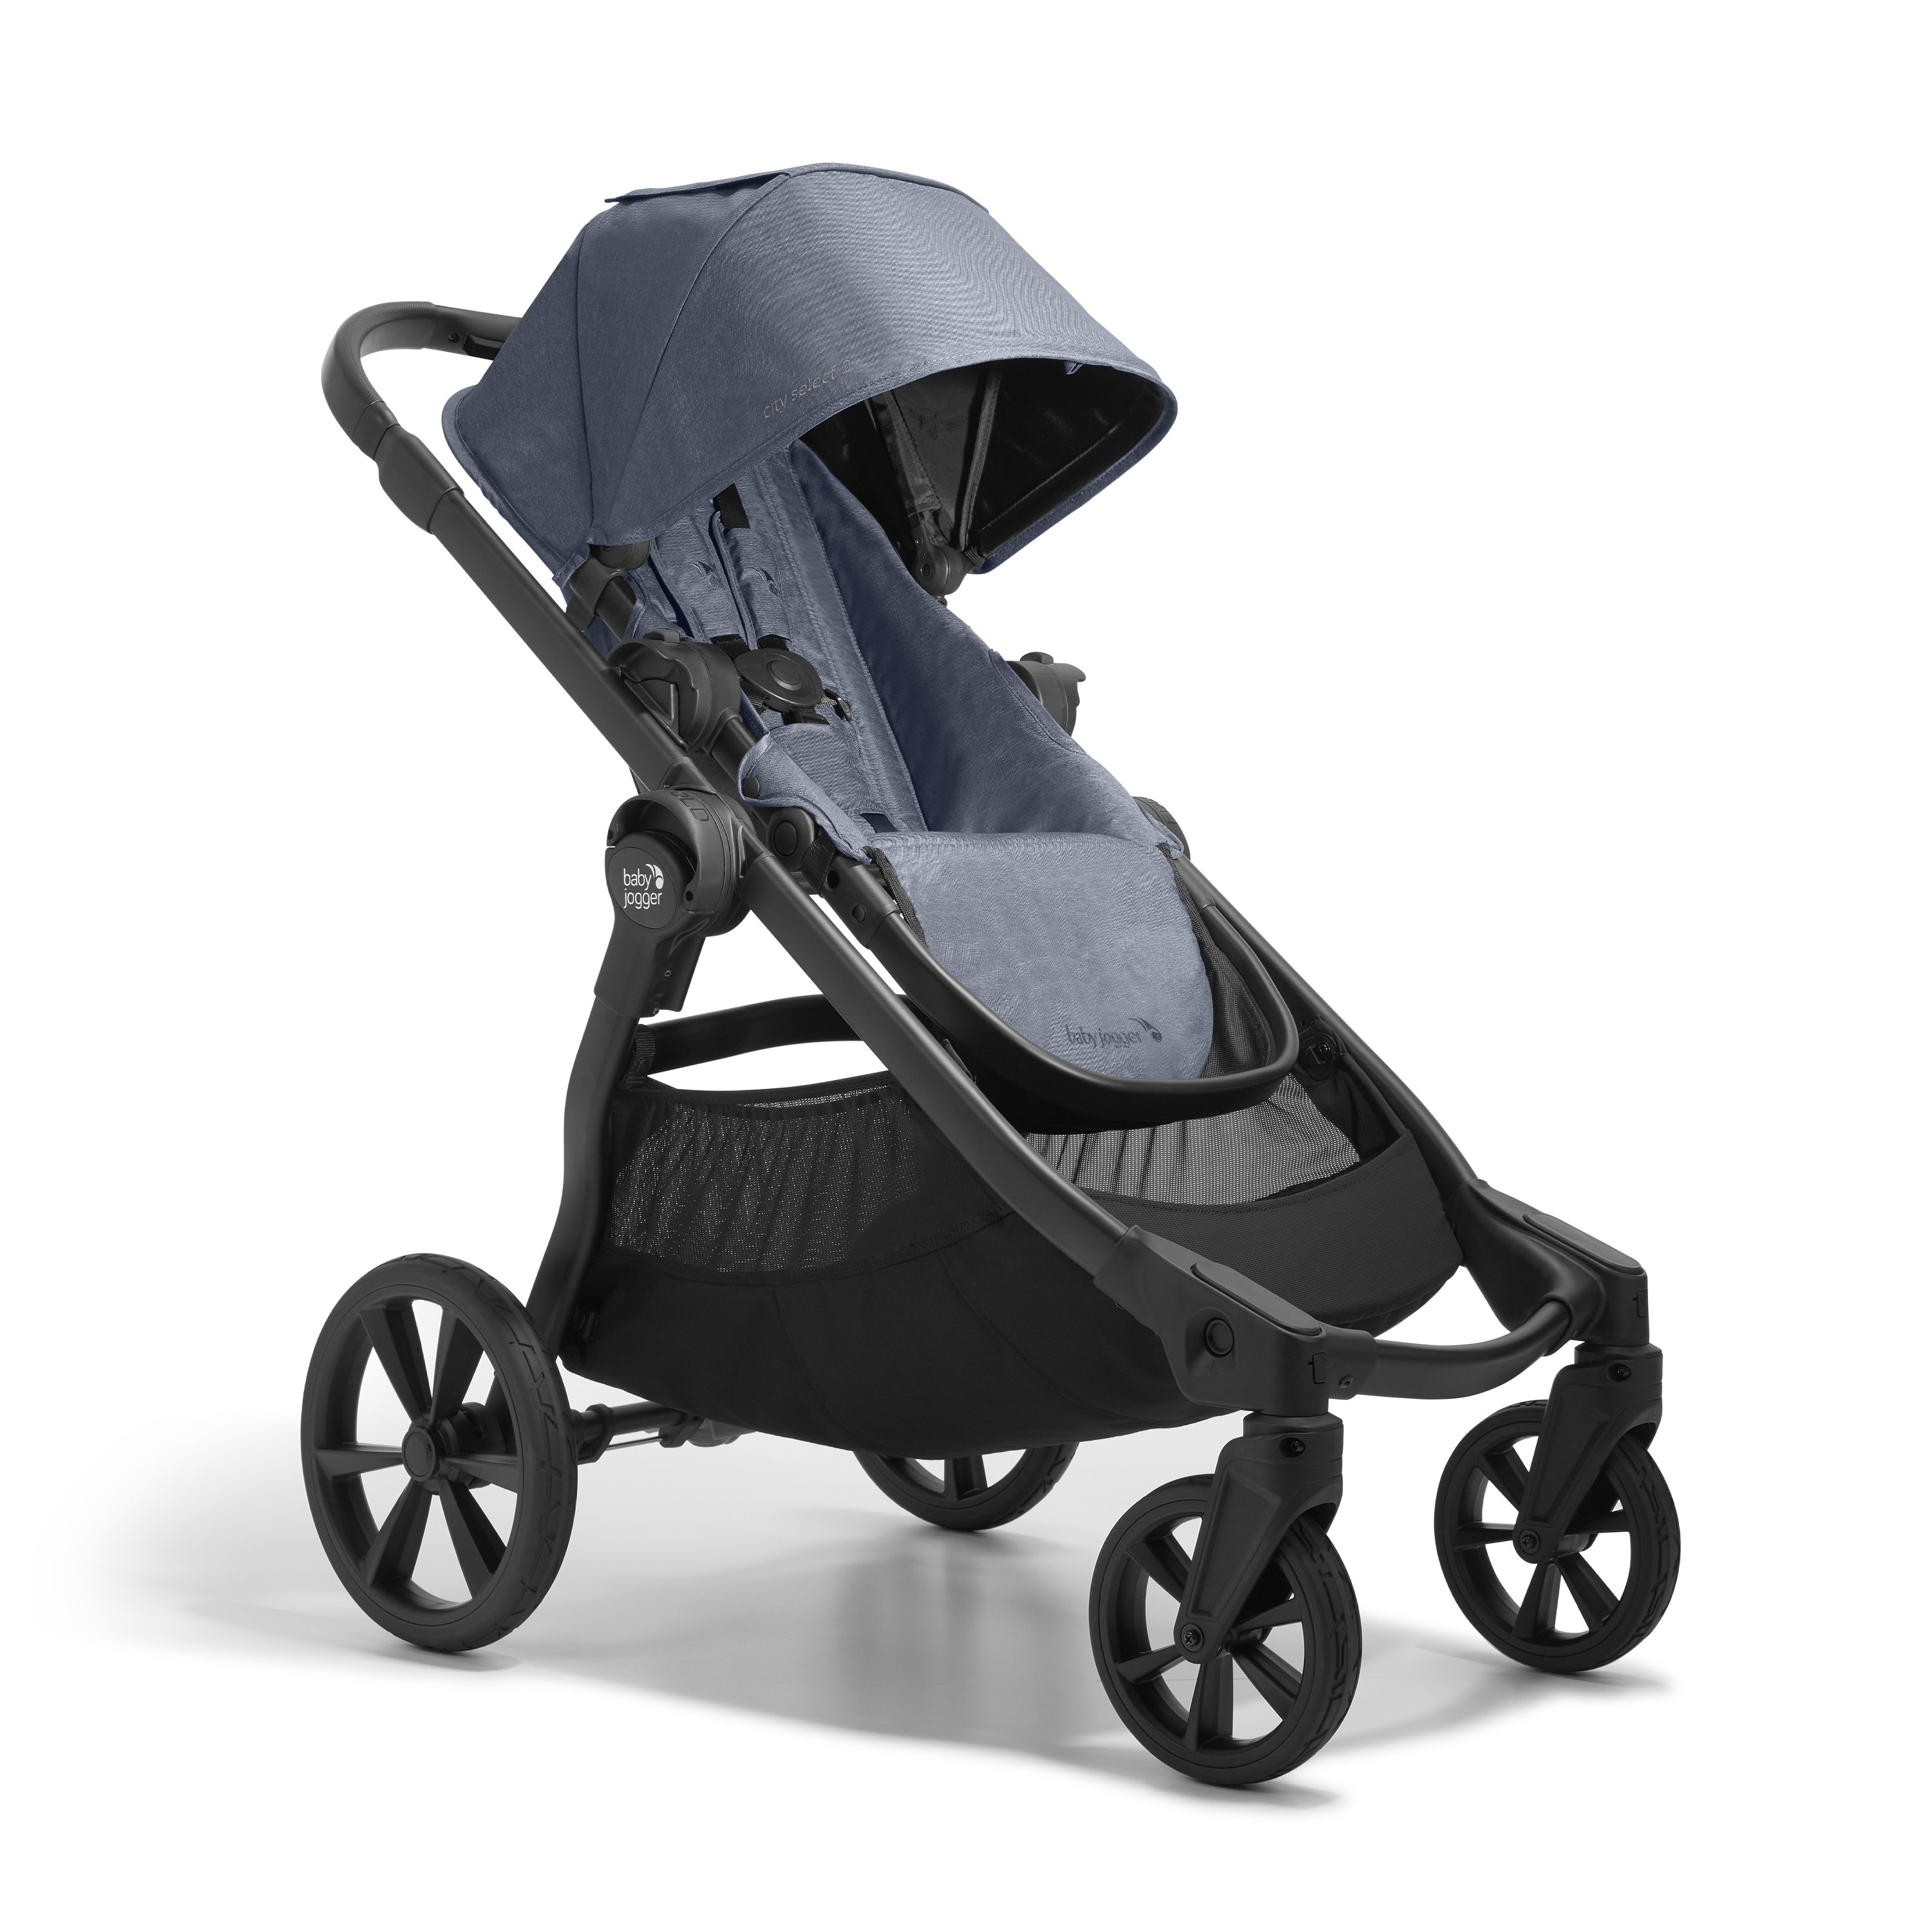 Baby Jogger city select® stroller | Baby Jogger